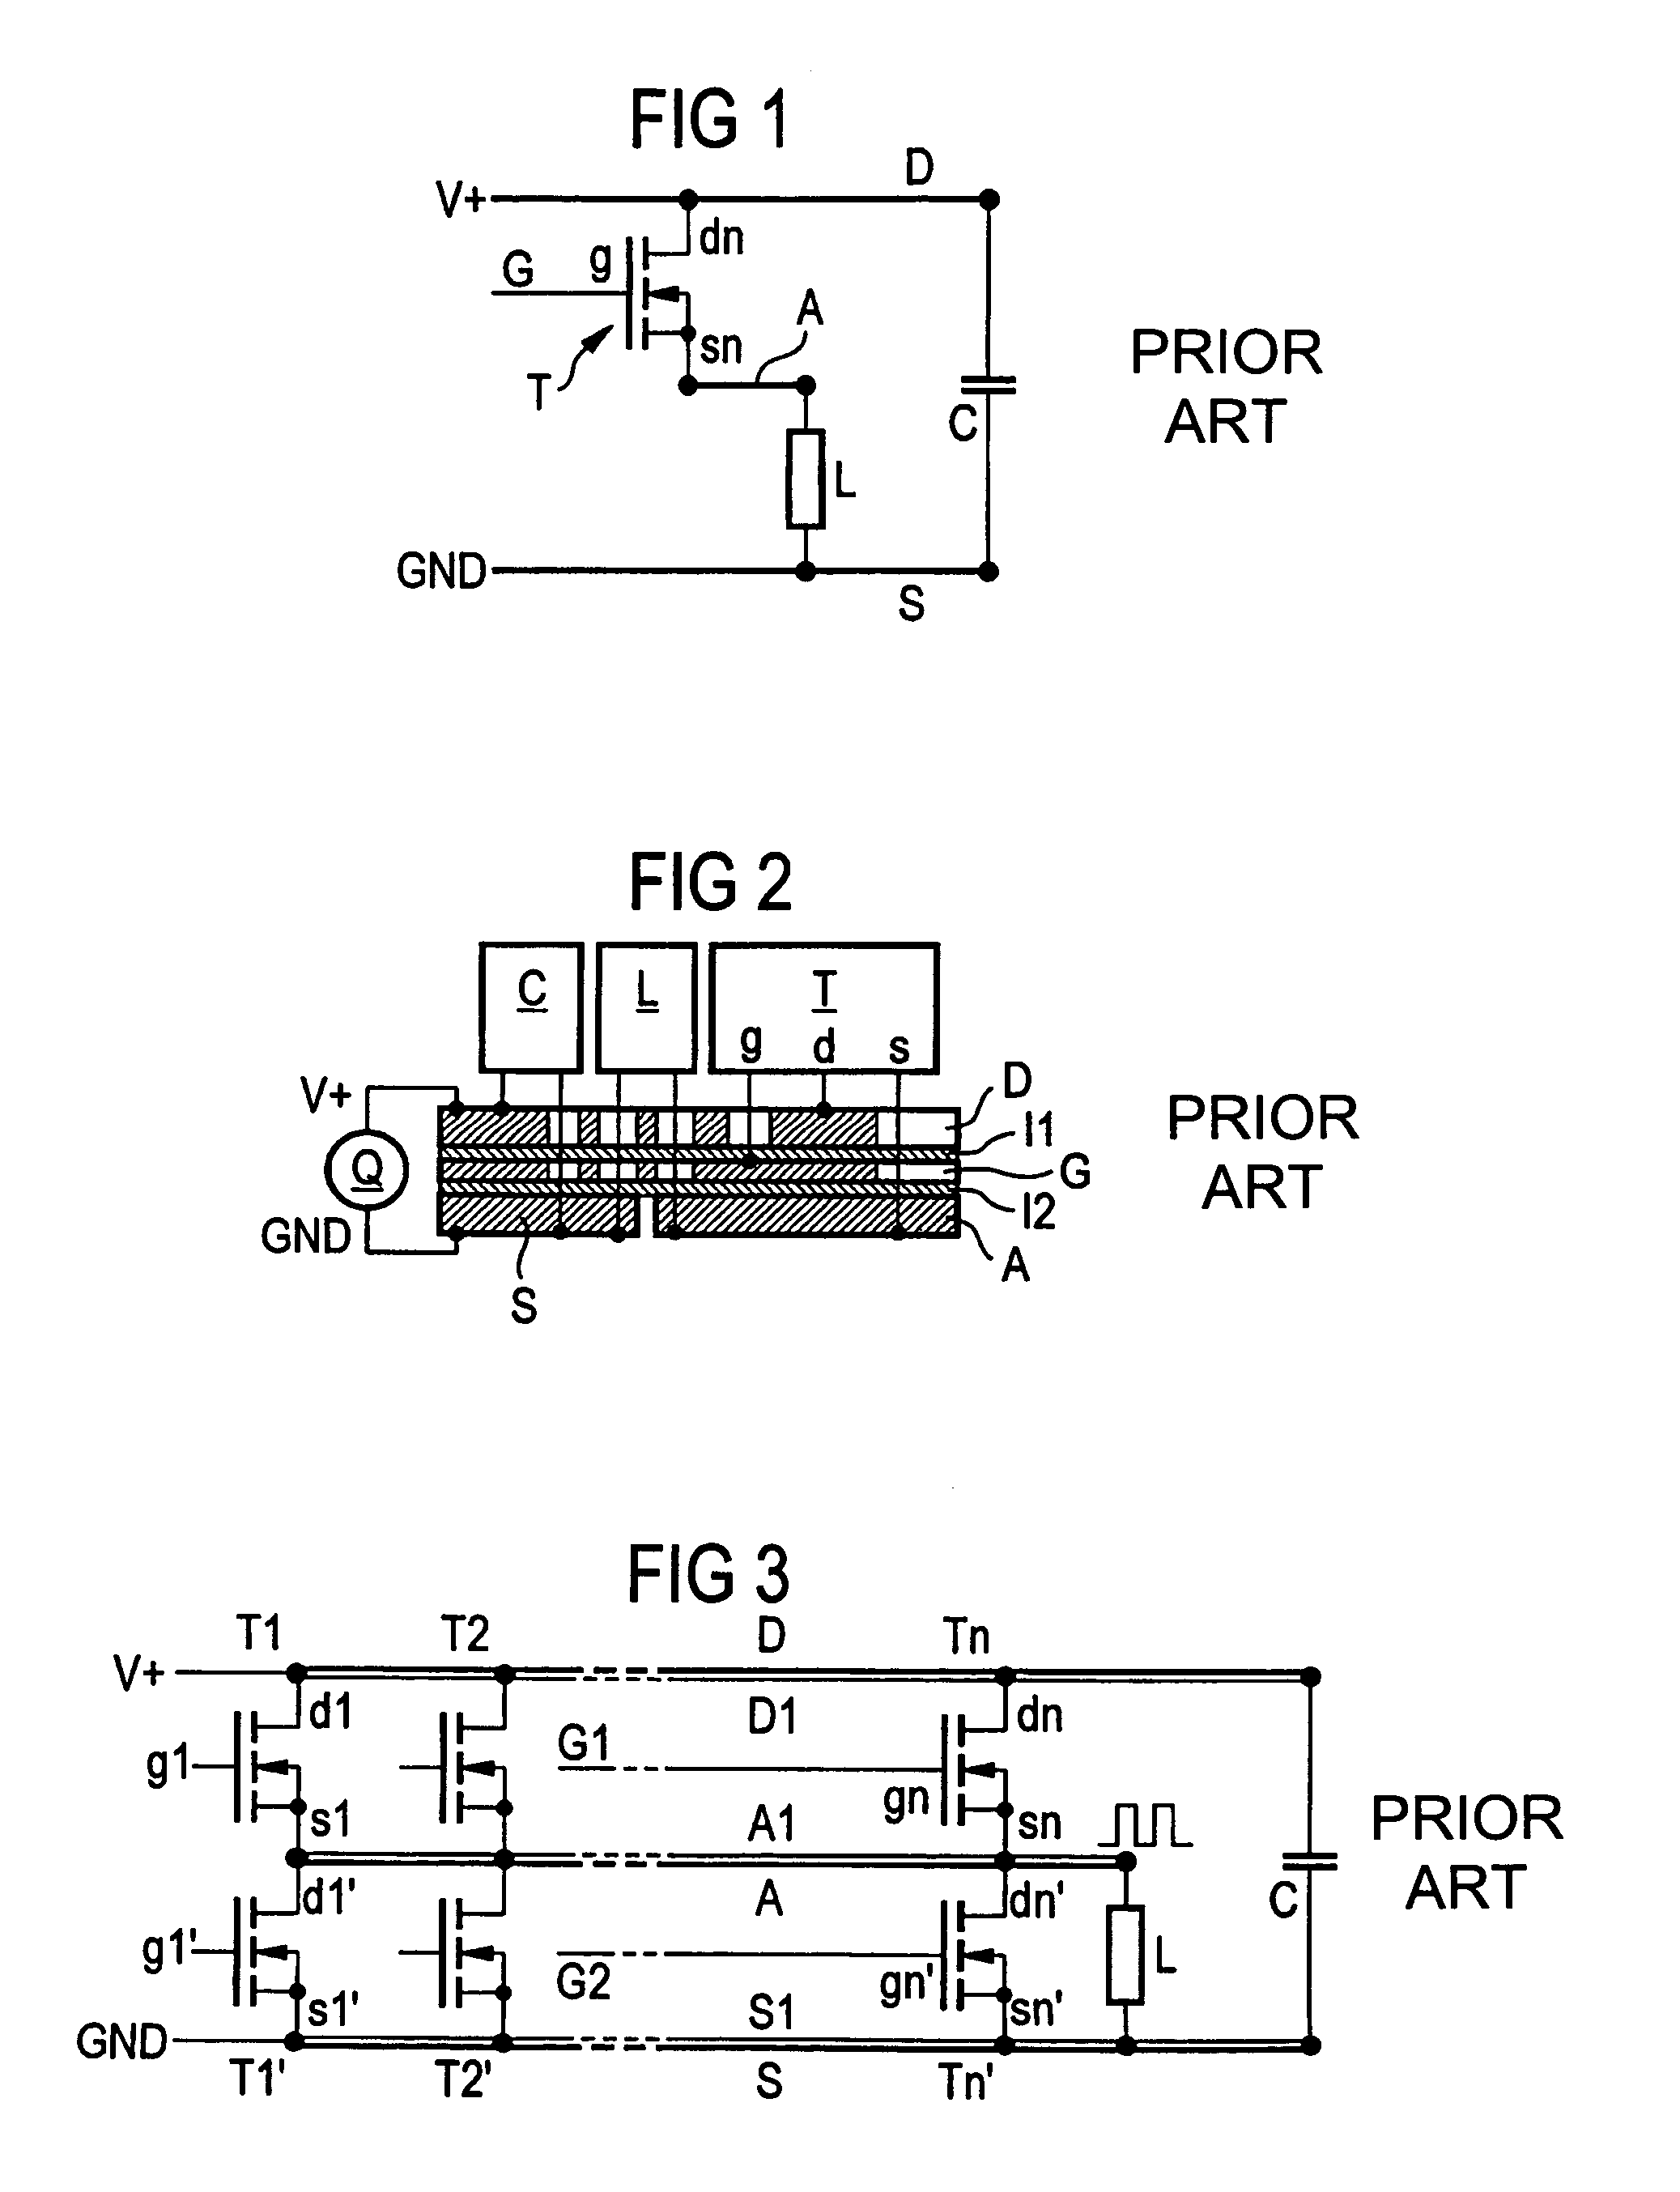 Circuit design for a circuit for switching currents